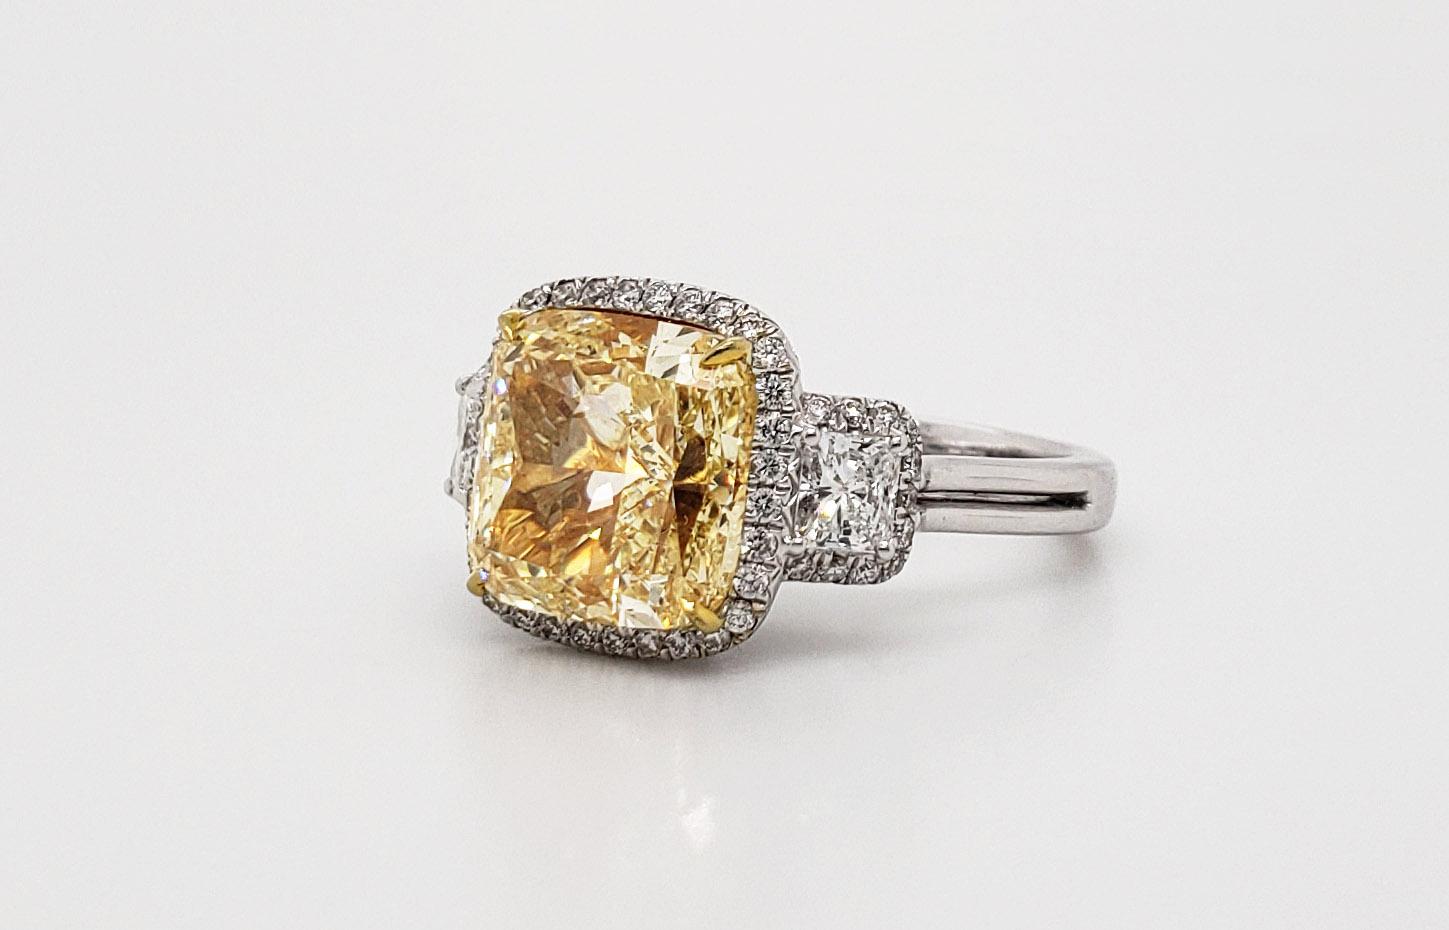 Contemporary Scarselli Six Carat Fancy Yellow Cushion Cut Diamond Ring in Platinum, GIA For Sale